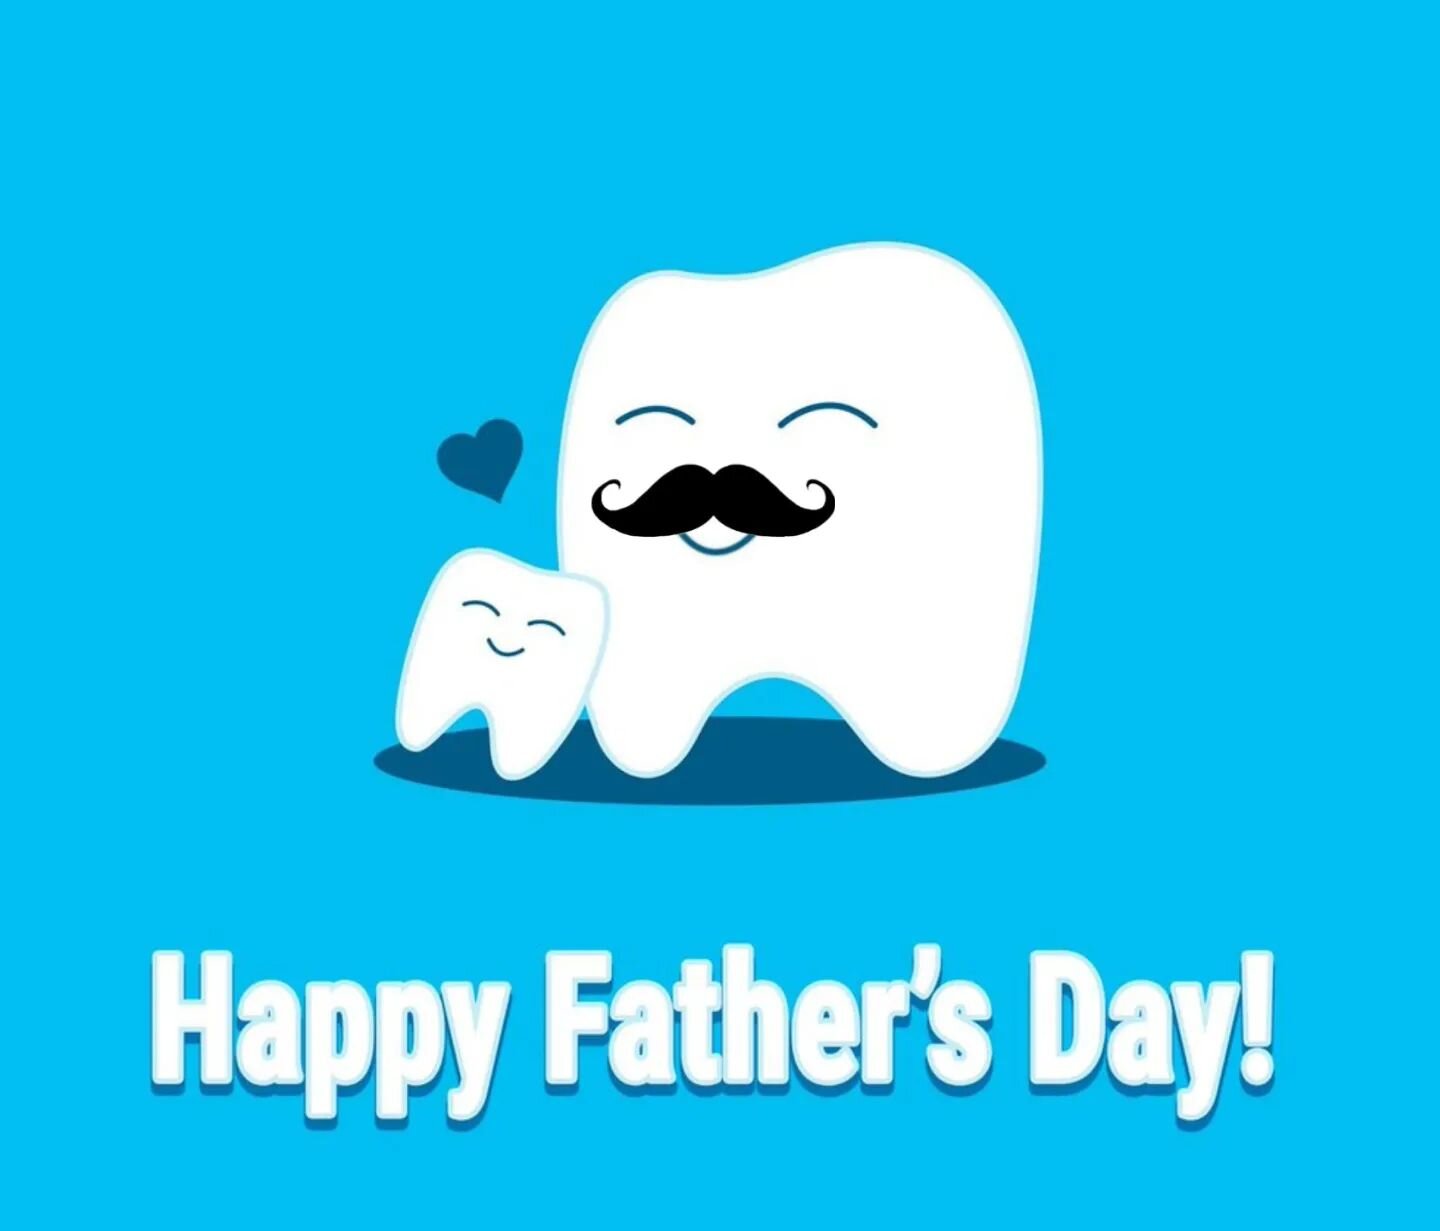 Today we celebrate the wonderful dads, bonus dads, dad-like figures, and dads in heaven who always inspire us to be happy, bright and sparkling.✨✨ Happy Father's Day from all of us at Clayton Family DDS! ✨✨